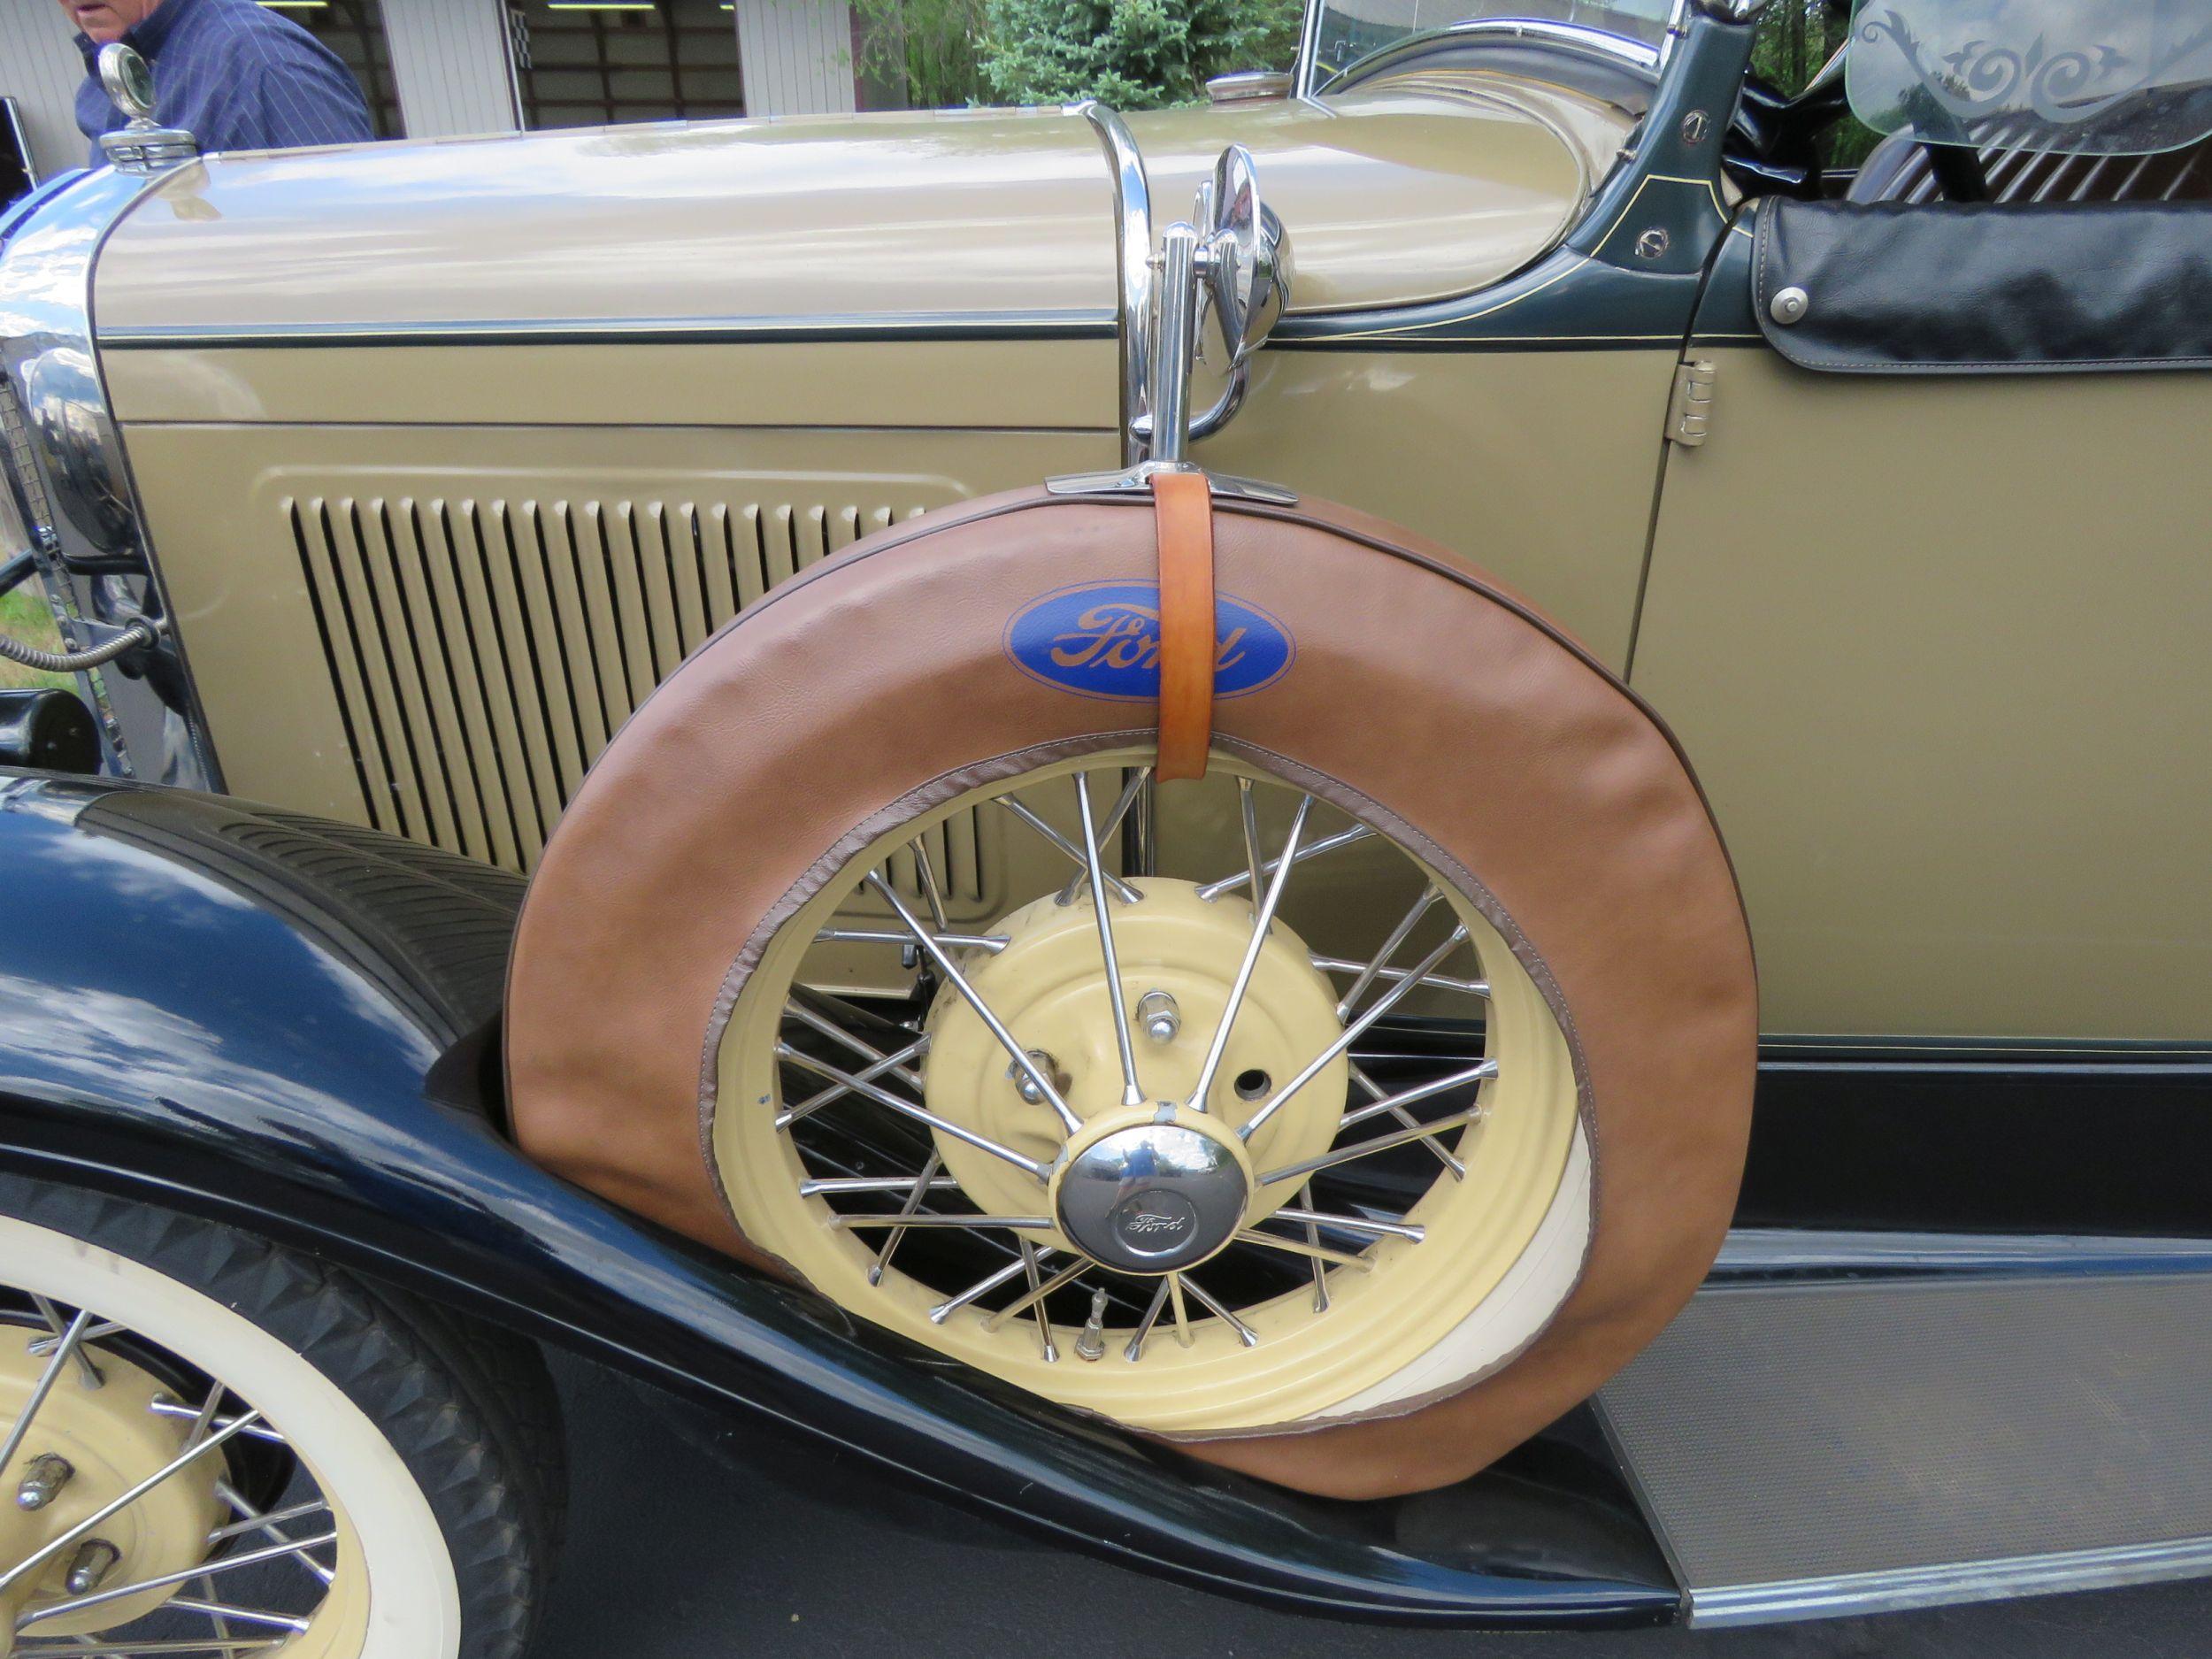 1931 Ford Model A Rumble Seat Roadster